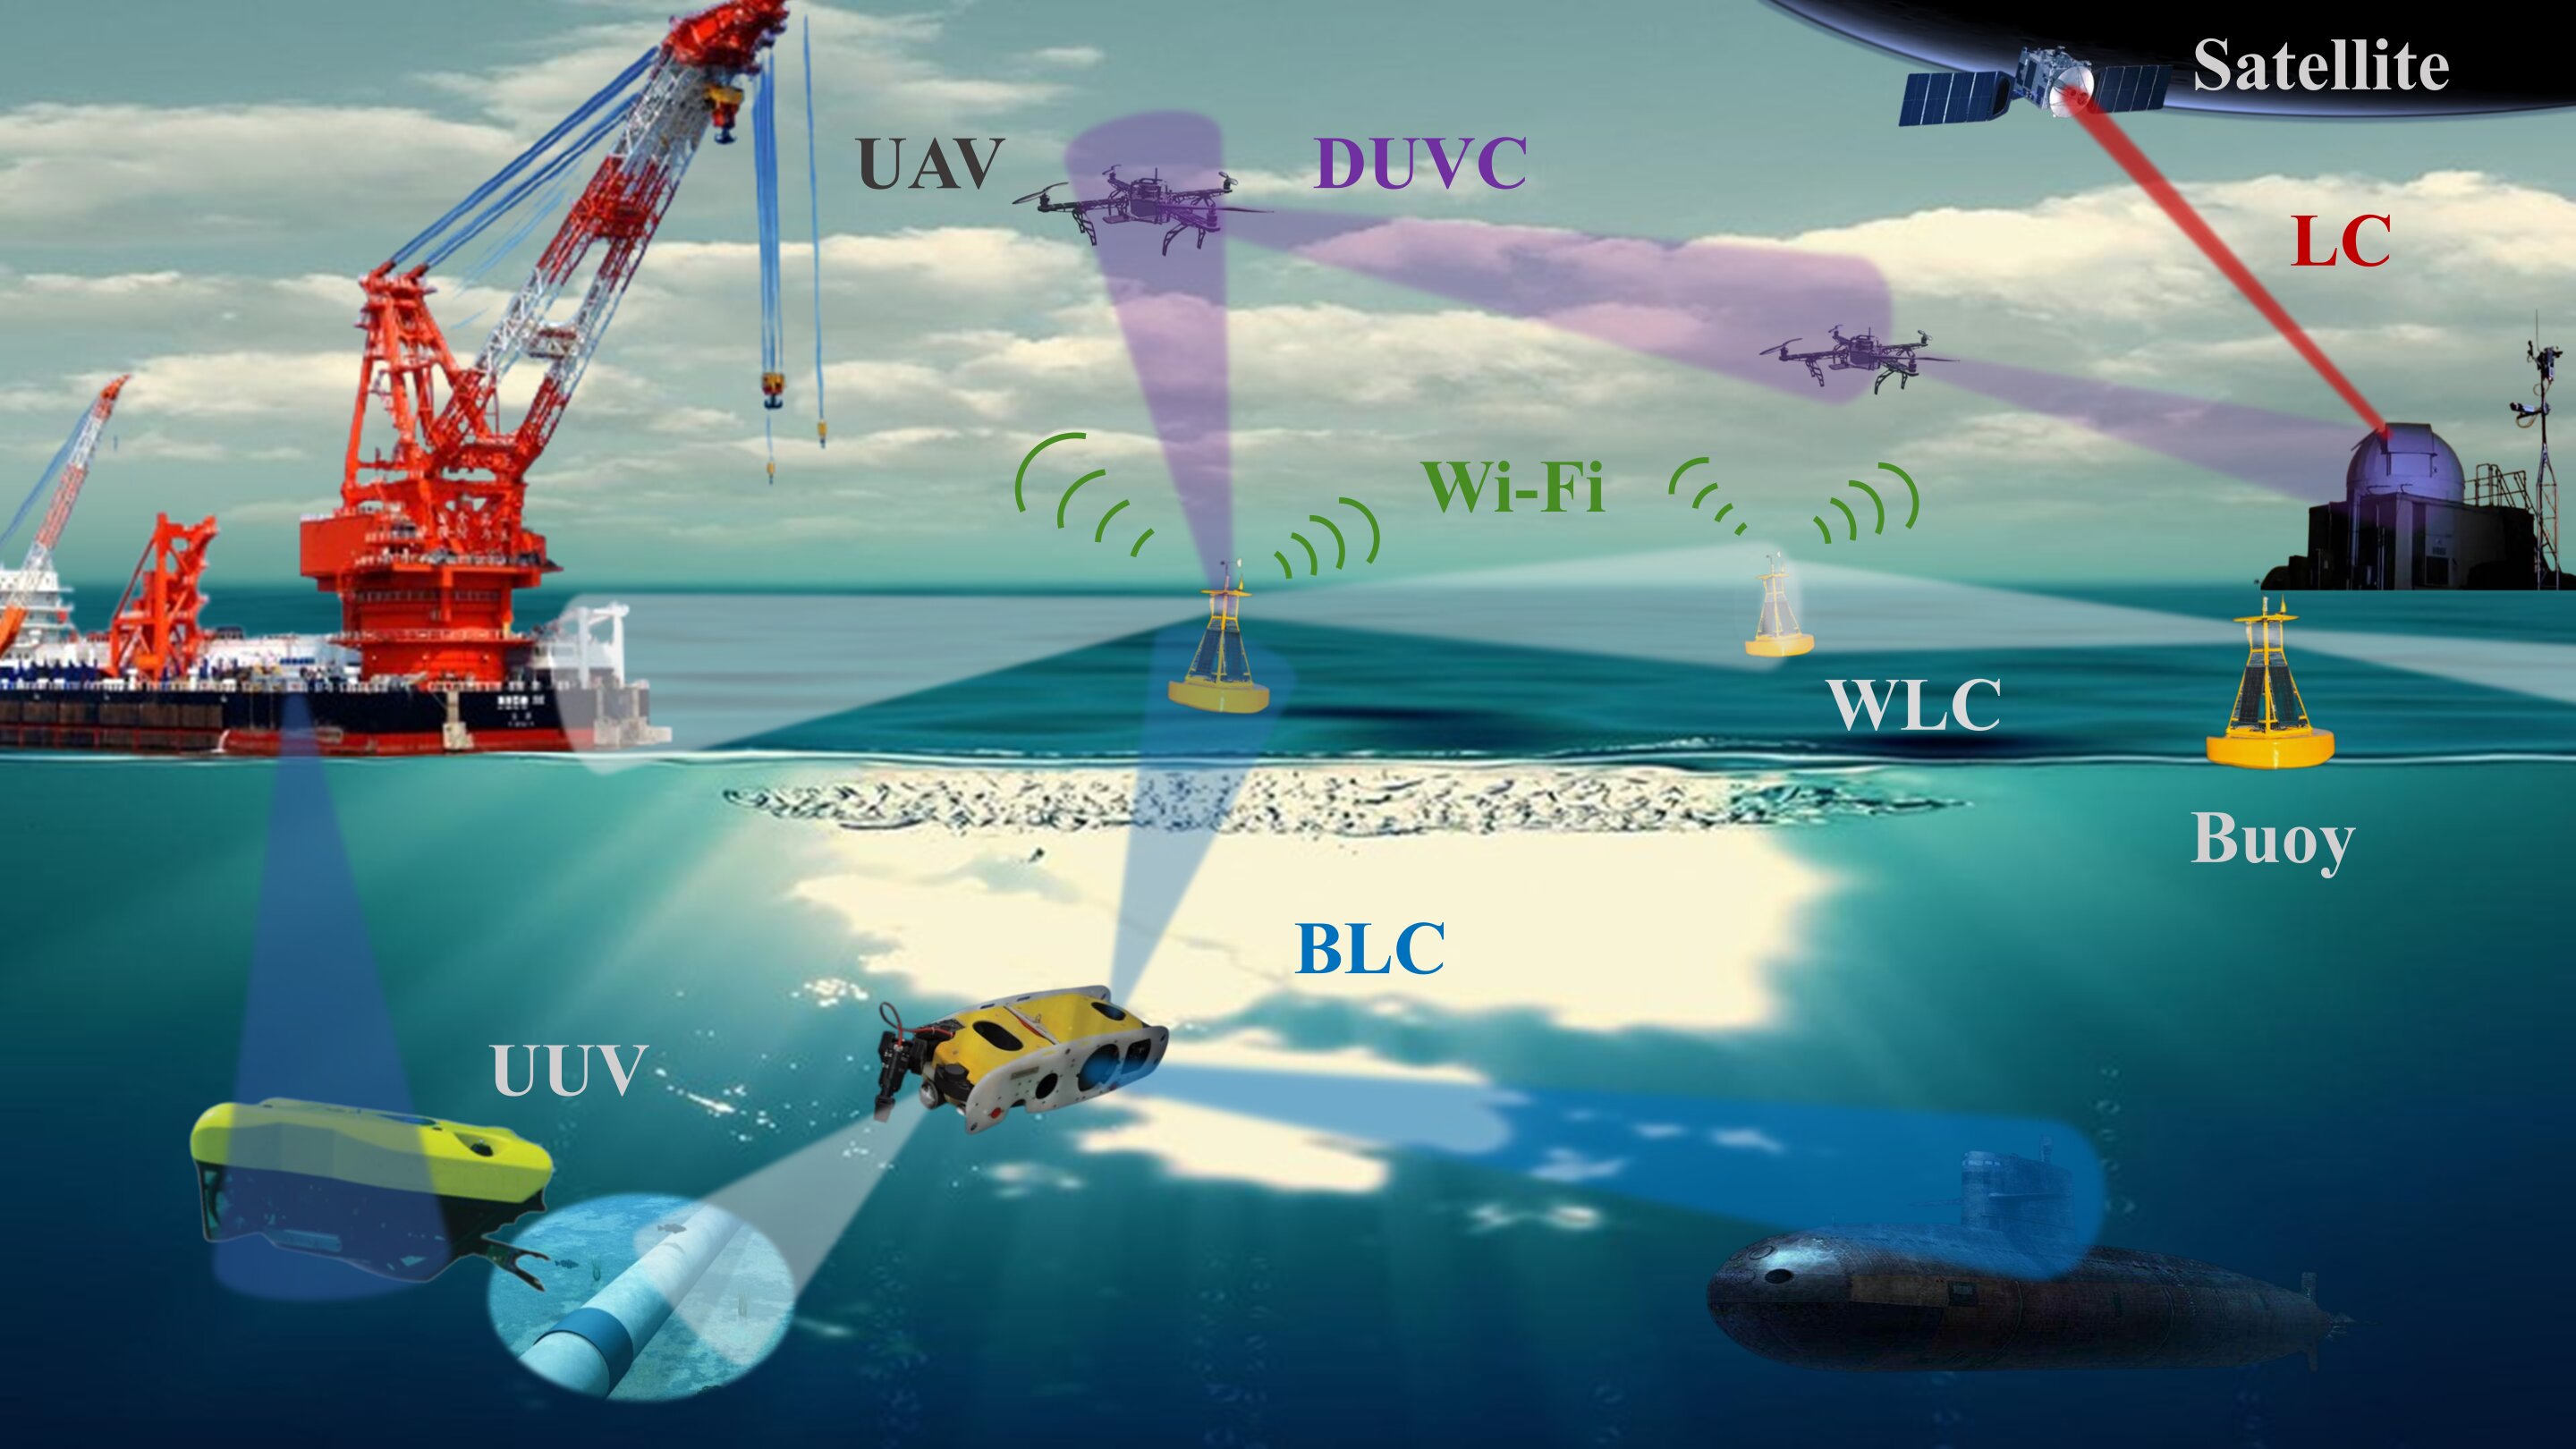 #All-light communication network bridges space, air and sea for seamless connectivity